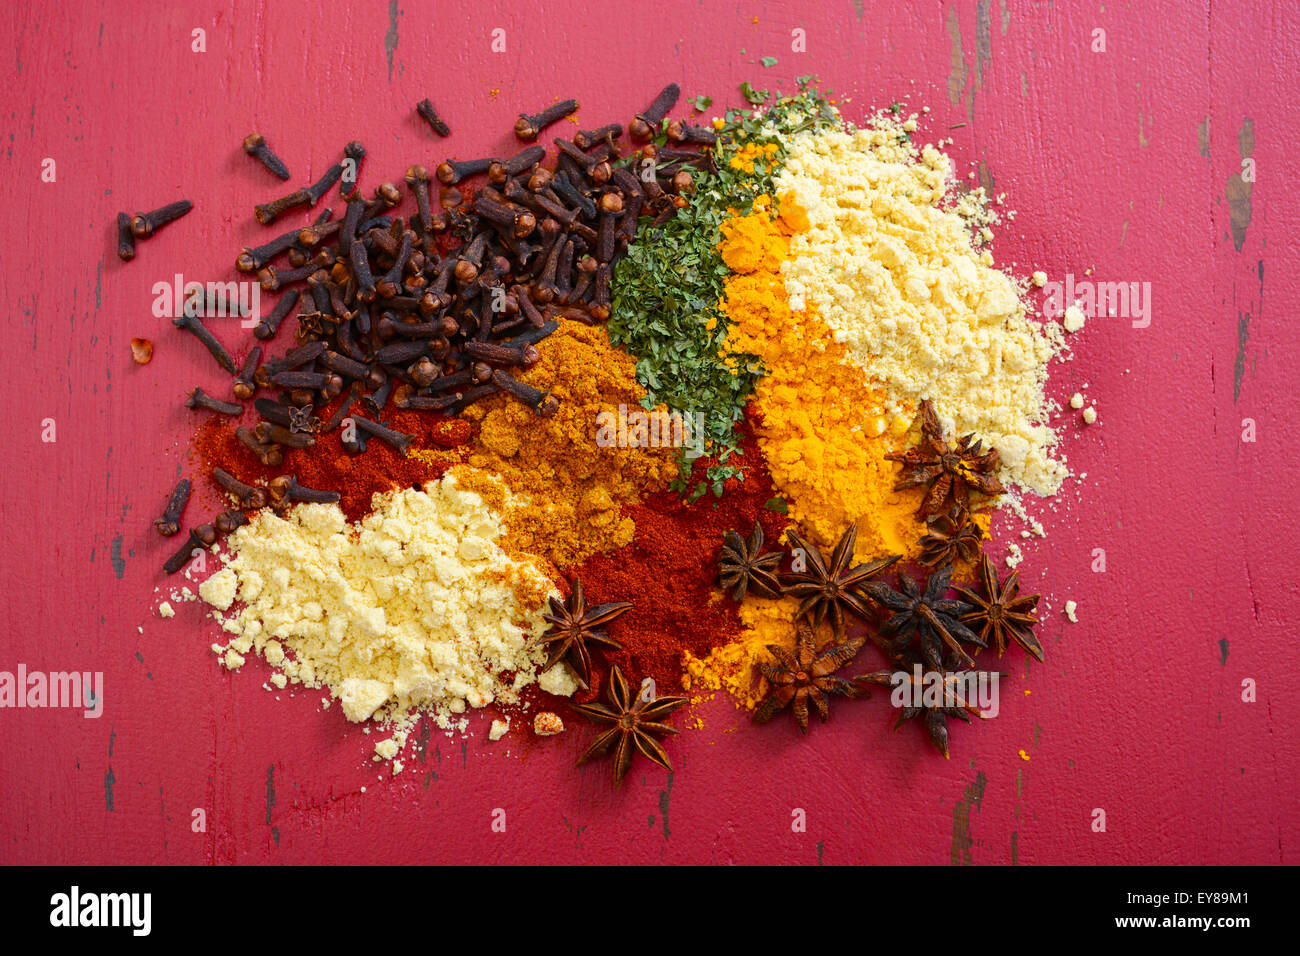 Colorful cooking spices and herbs on vintage red wood table. Stock Photo